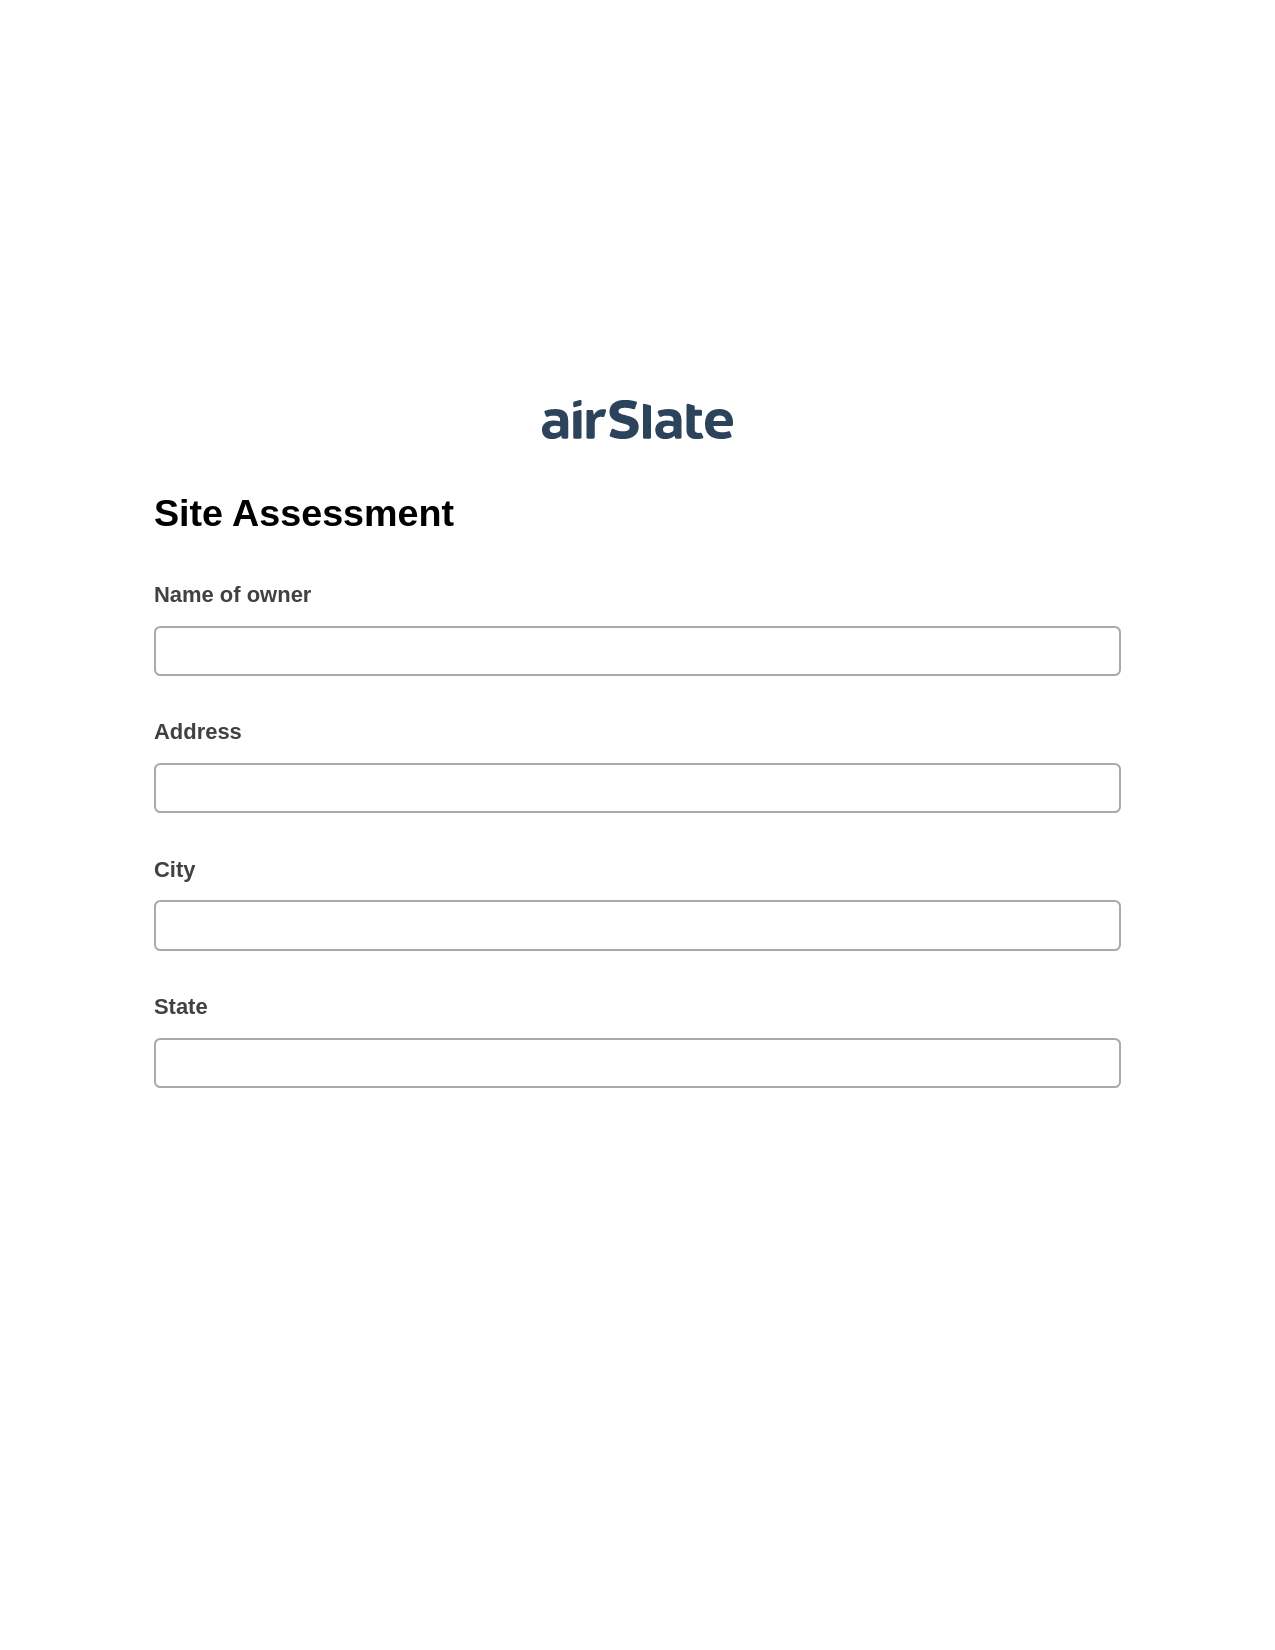 Site Assessment Pre-fill from CSV File Dropdown Options Bot, Unassign Role Bot, Export to Salesforce Bot